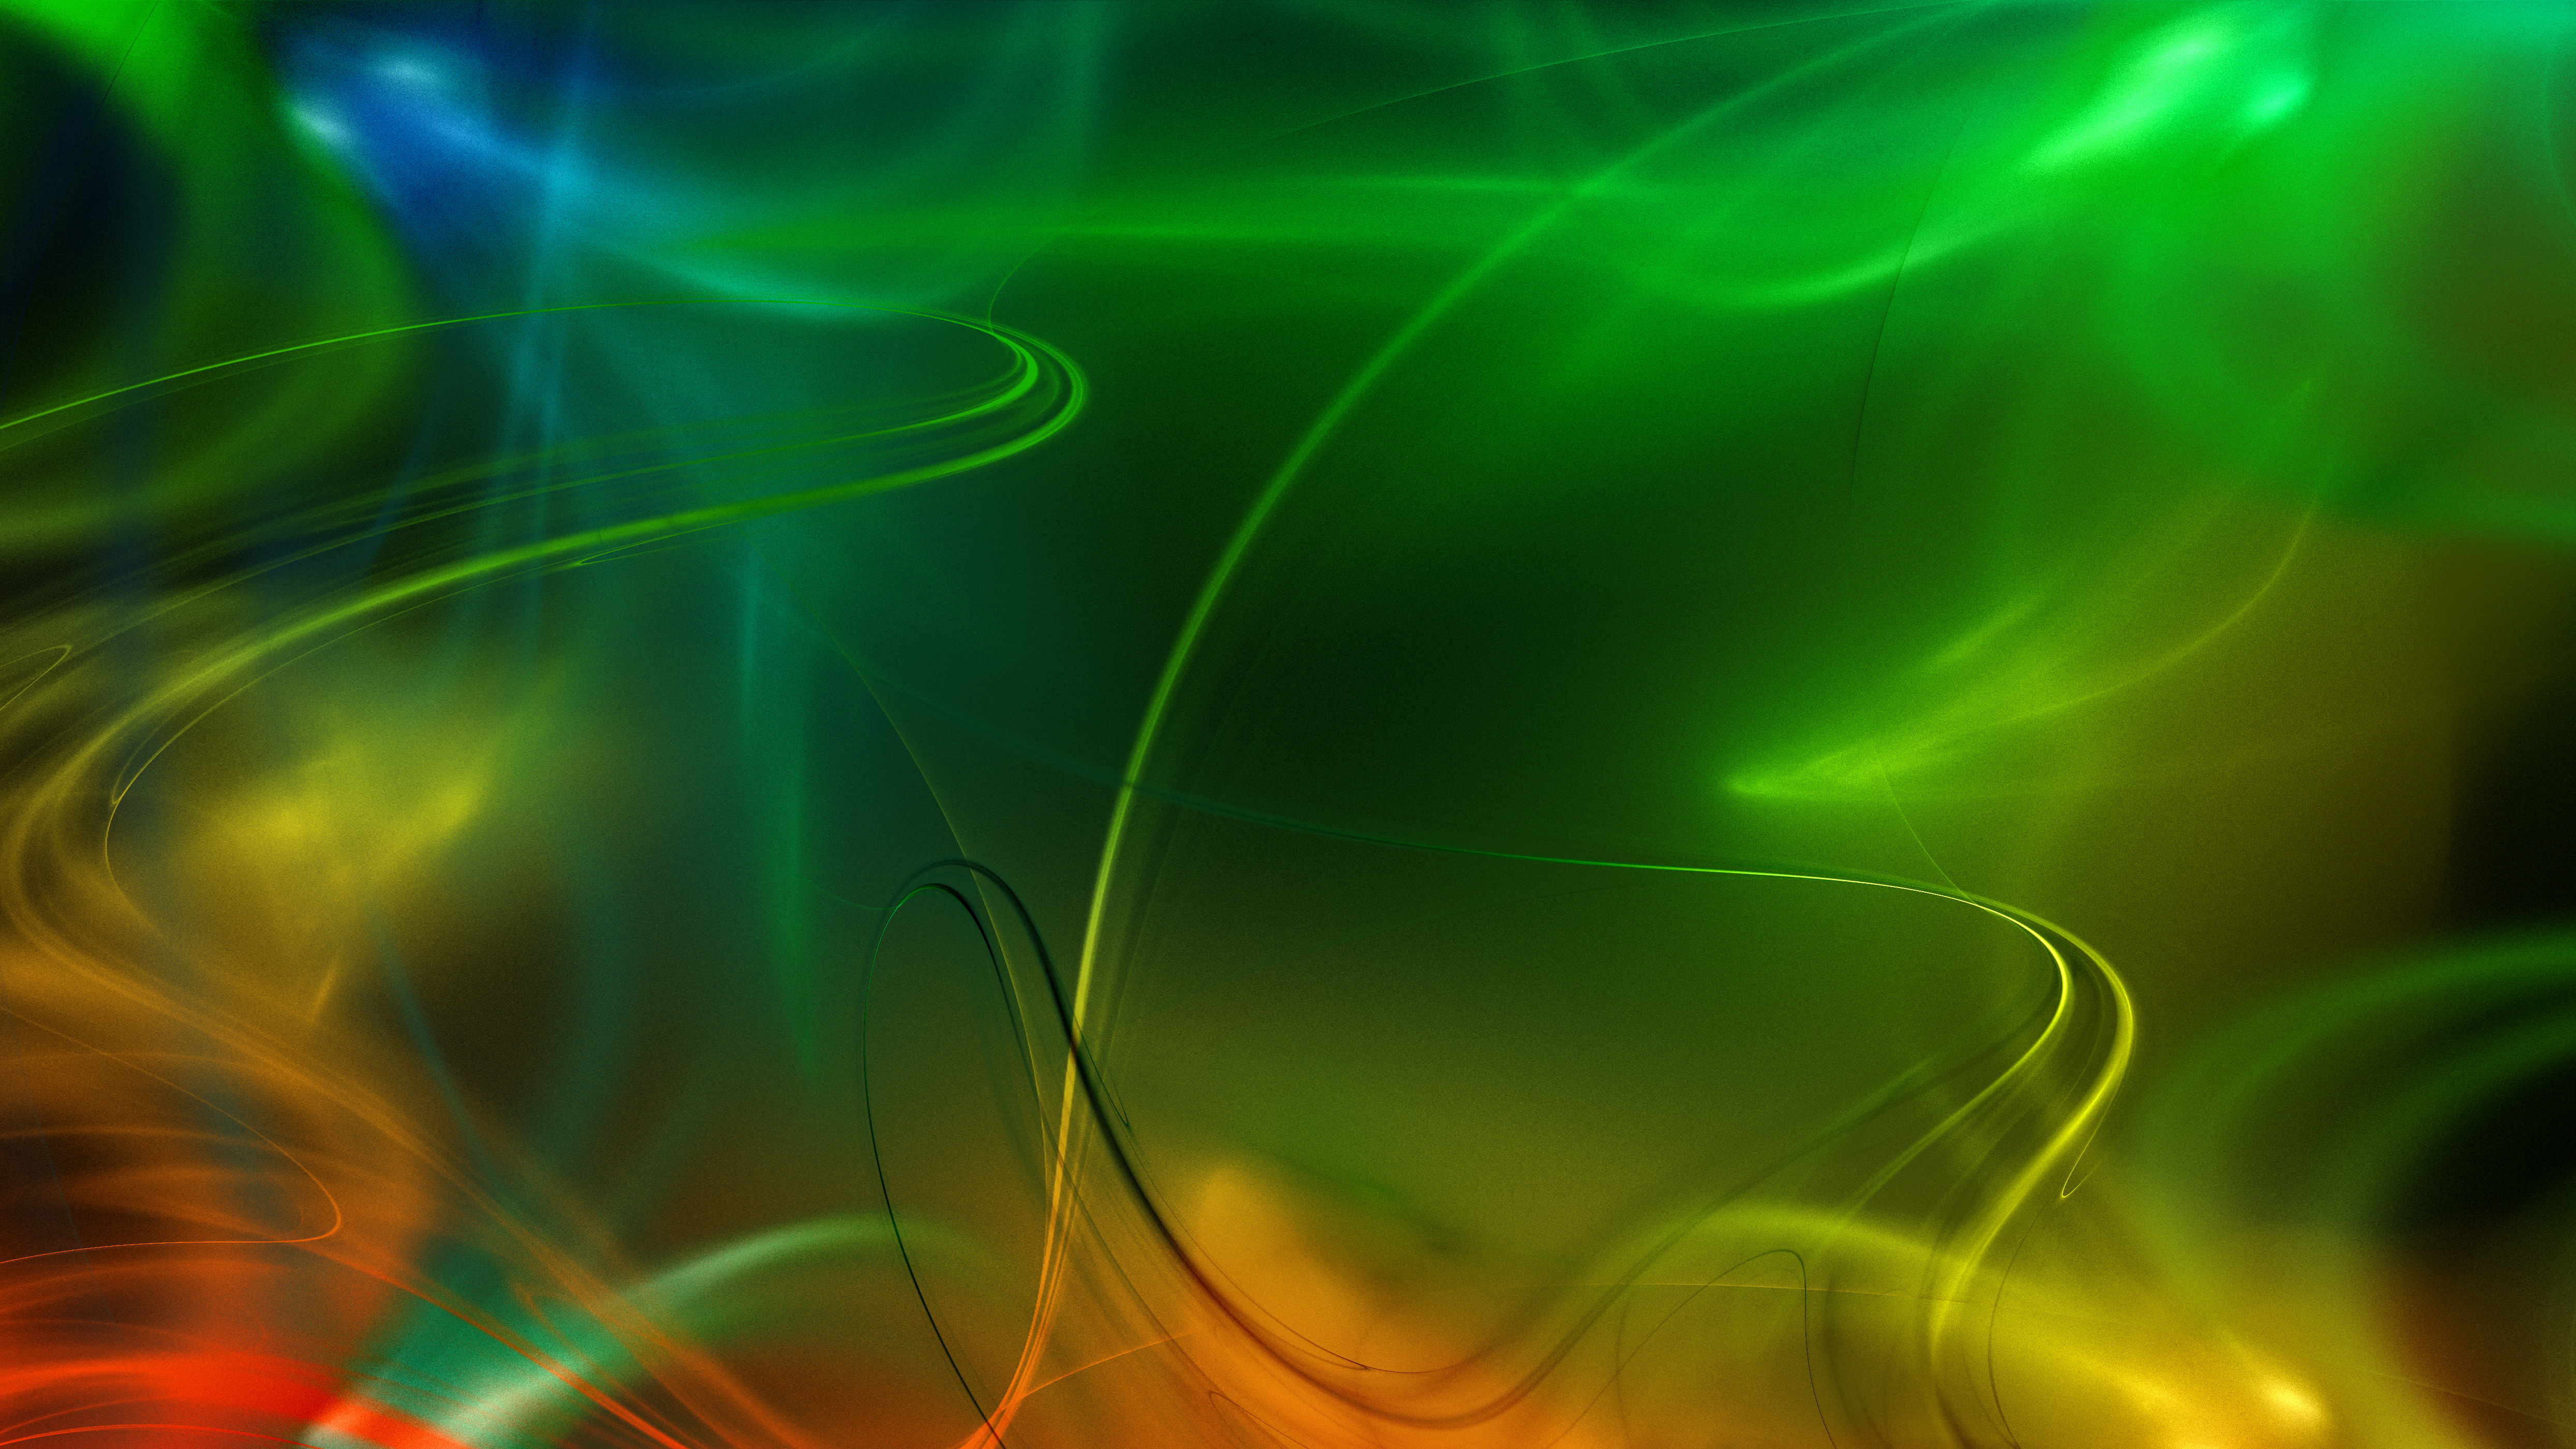 Elegant fractal background, Abstract, Graphics, Wallpaper, Style, HQ Photo